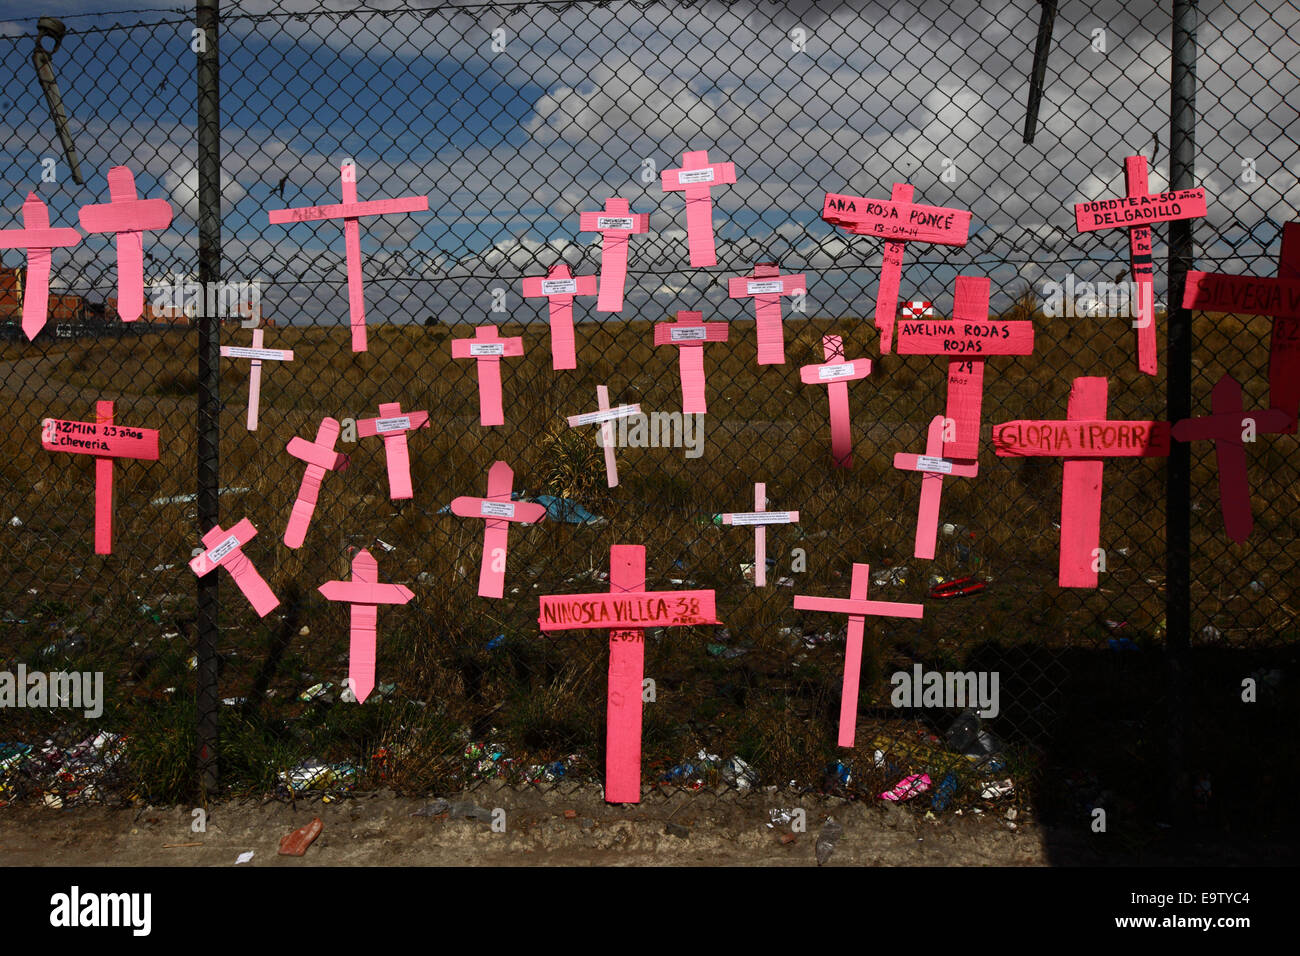 EL ALTO, BOLIVIA, 2nd November 2014. Crosses with the names of women on a wire mesh fence, part of a memorial for recent victims of femicide and domestic violence against women. According to a WHO report in January 2013 Bolivia is the country with the highest rate of violence against women in Latin America. Credit:  James Brunker / Alamy Live News Stock Photo